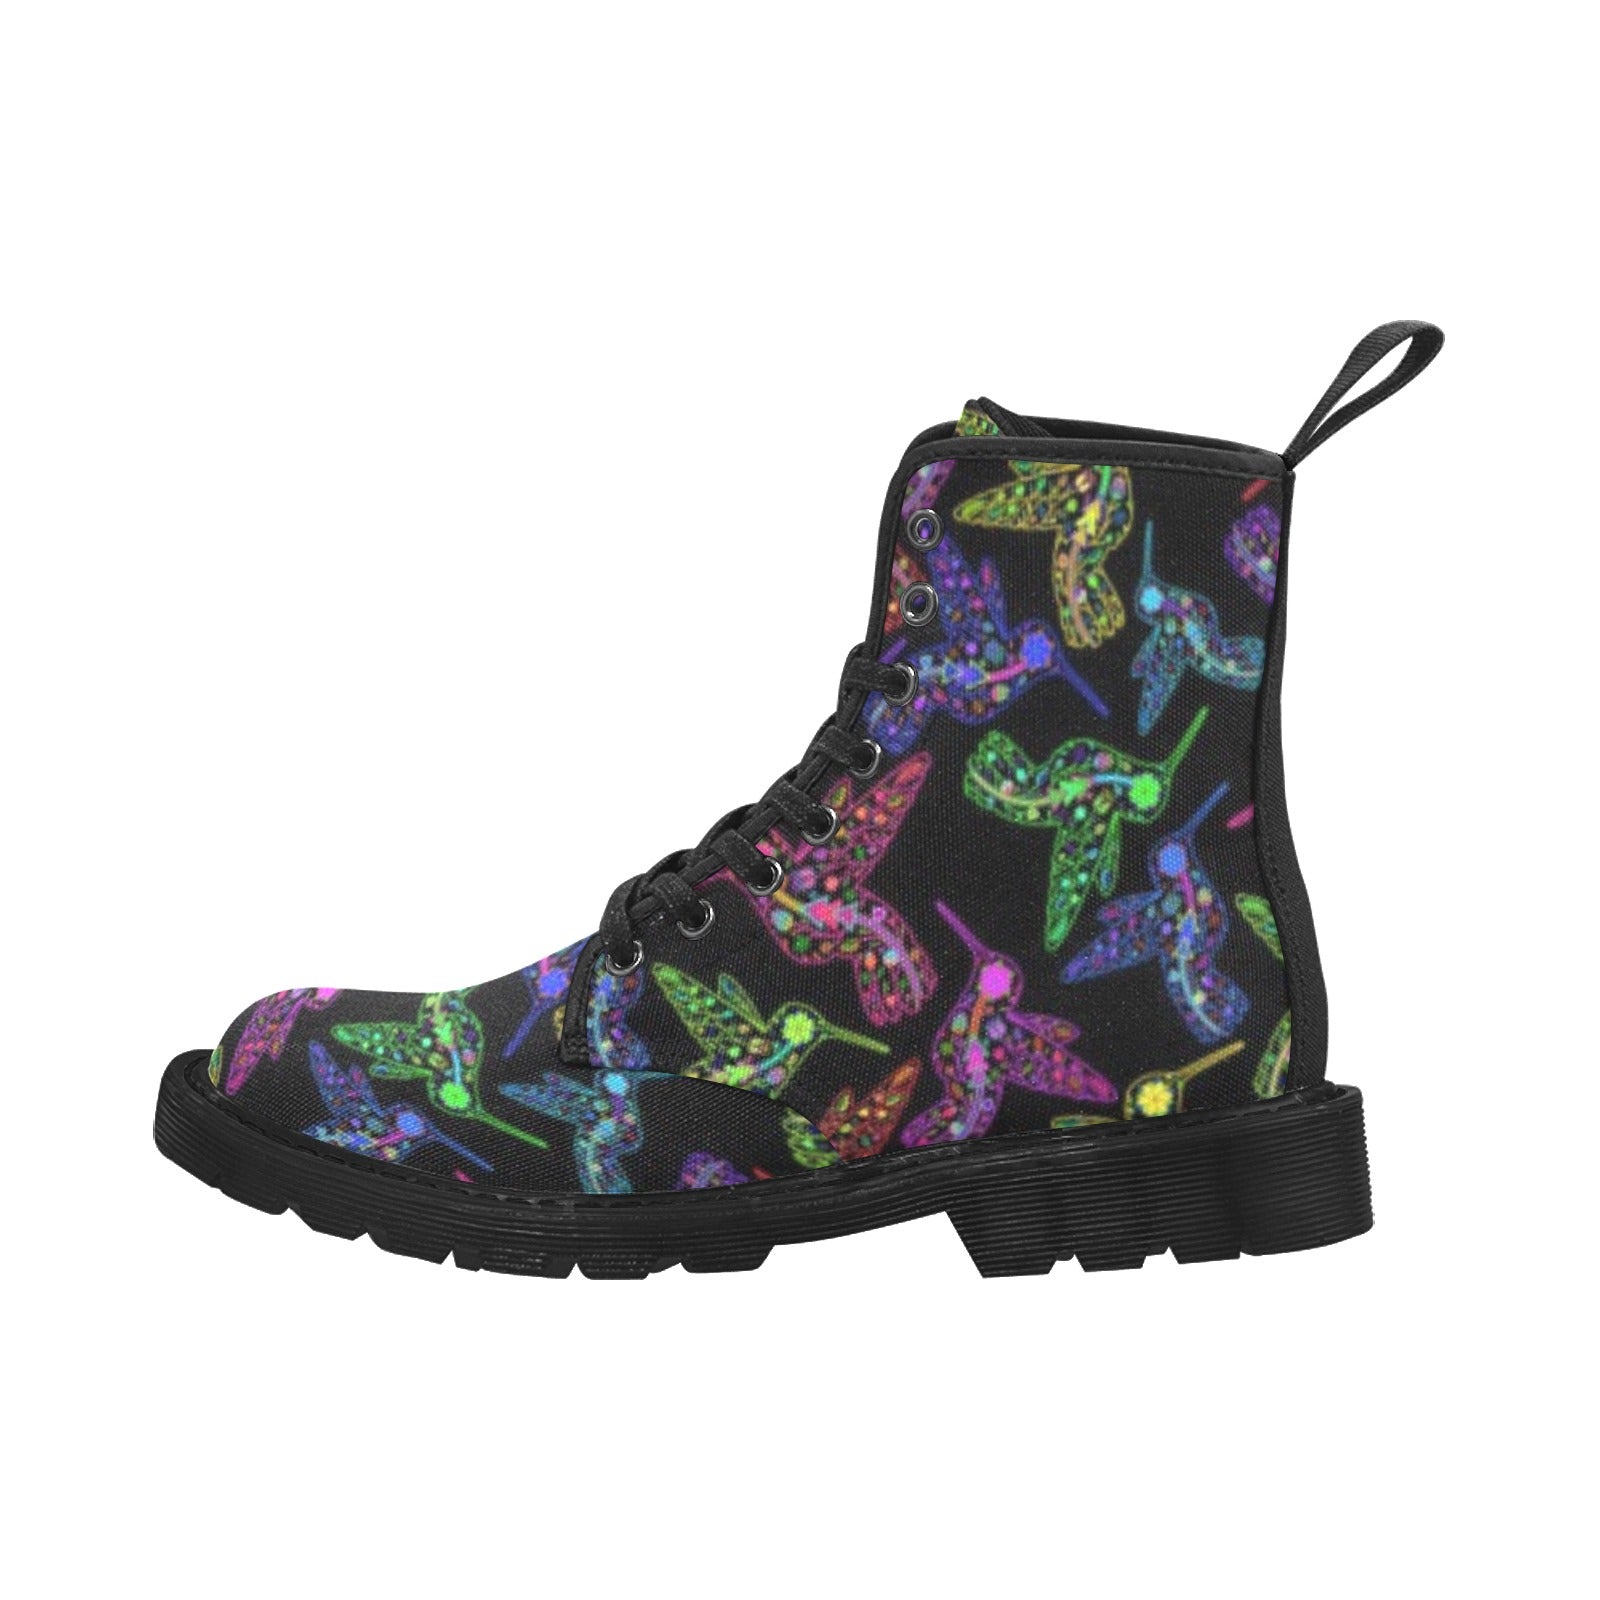 Neon Floral Hummingbirds Boots for Women (Black)